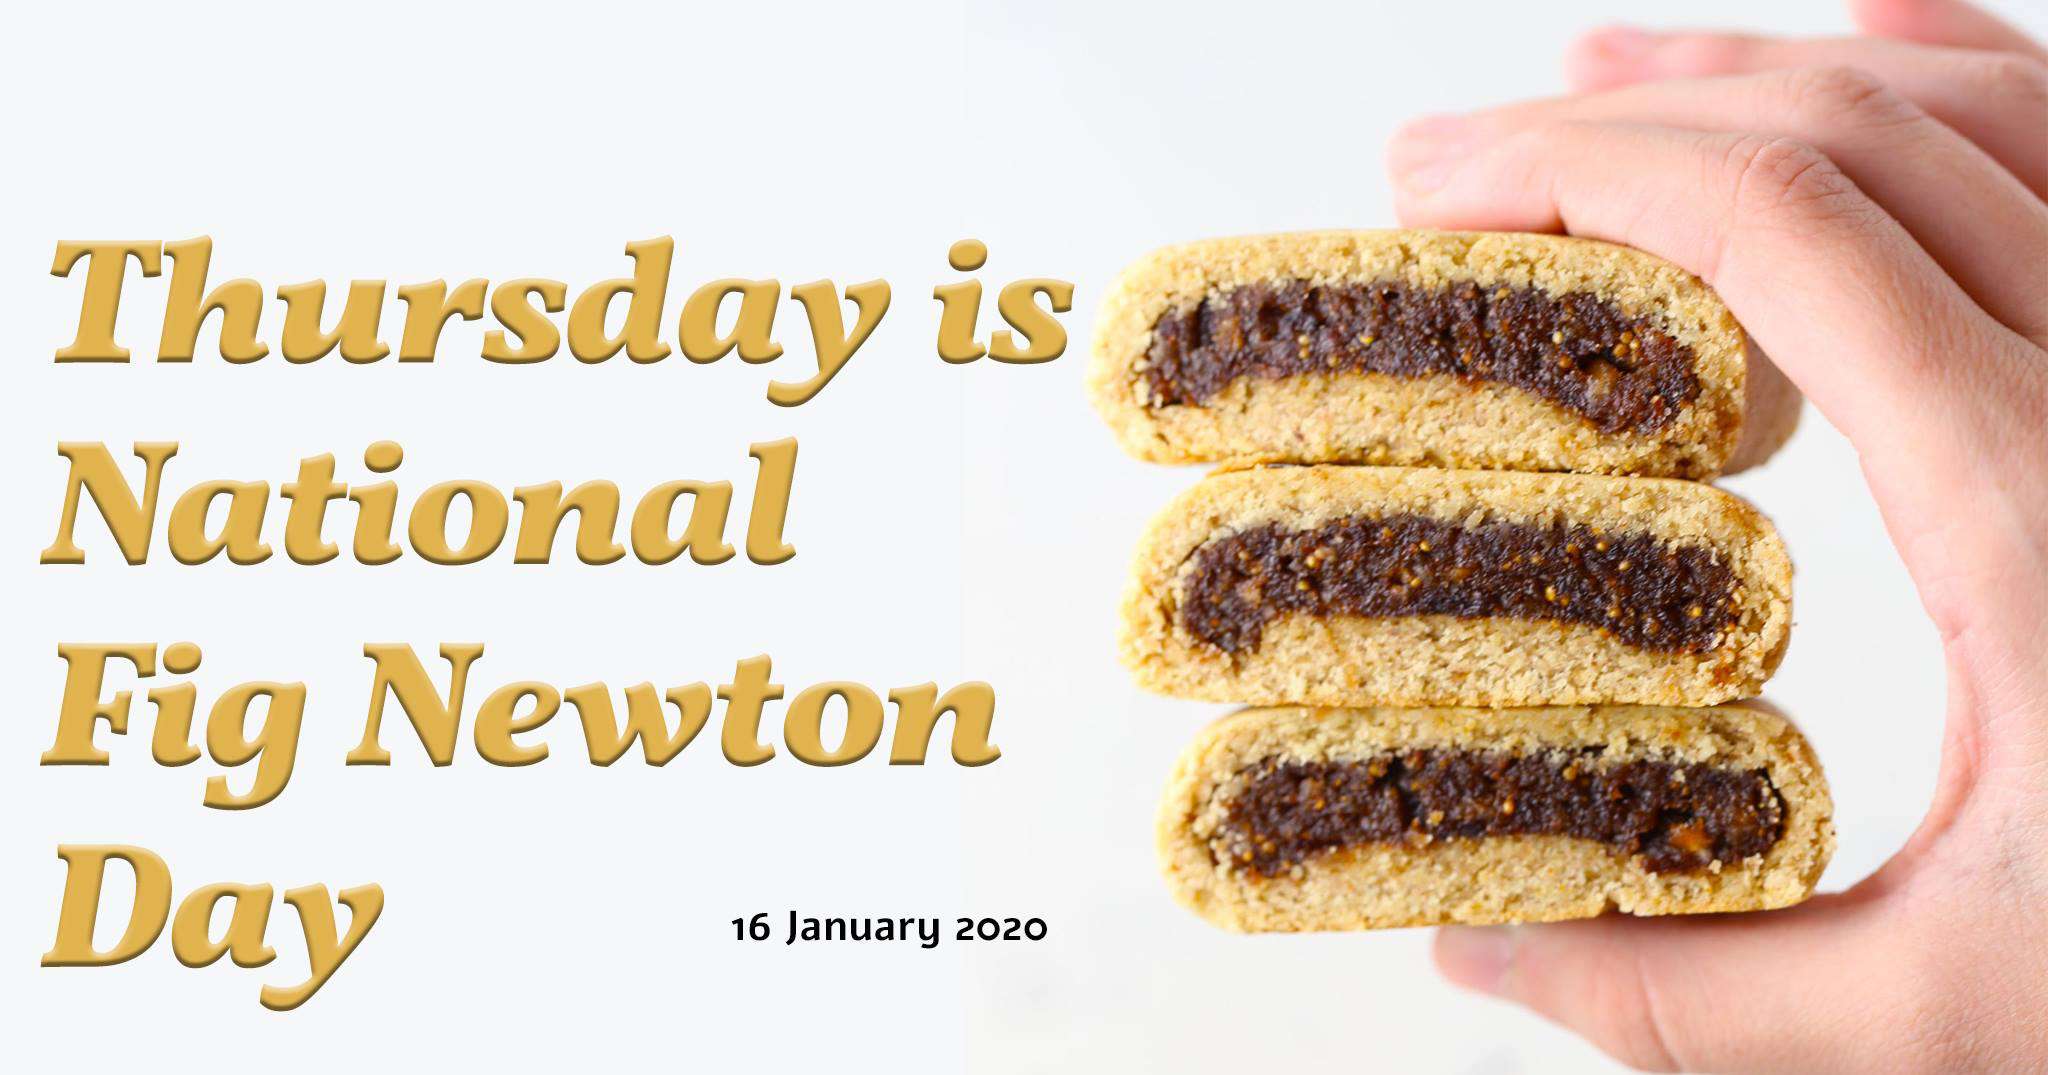 National Fig Newton Day Wishes pics free download